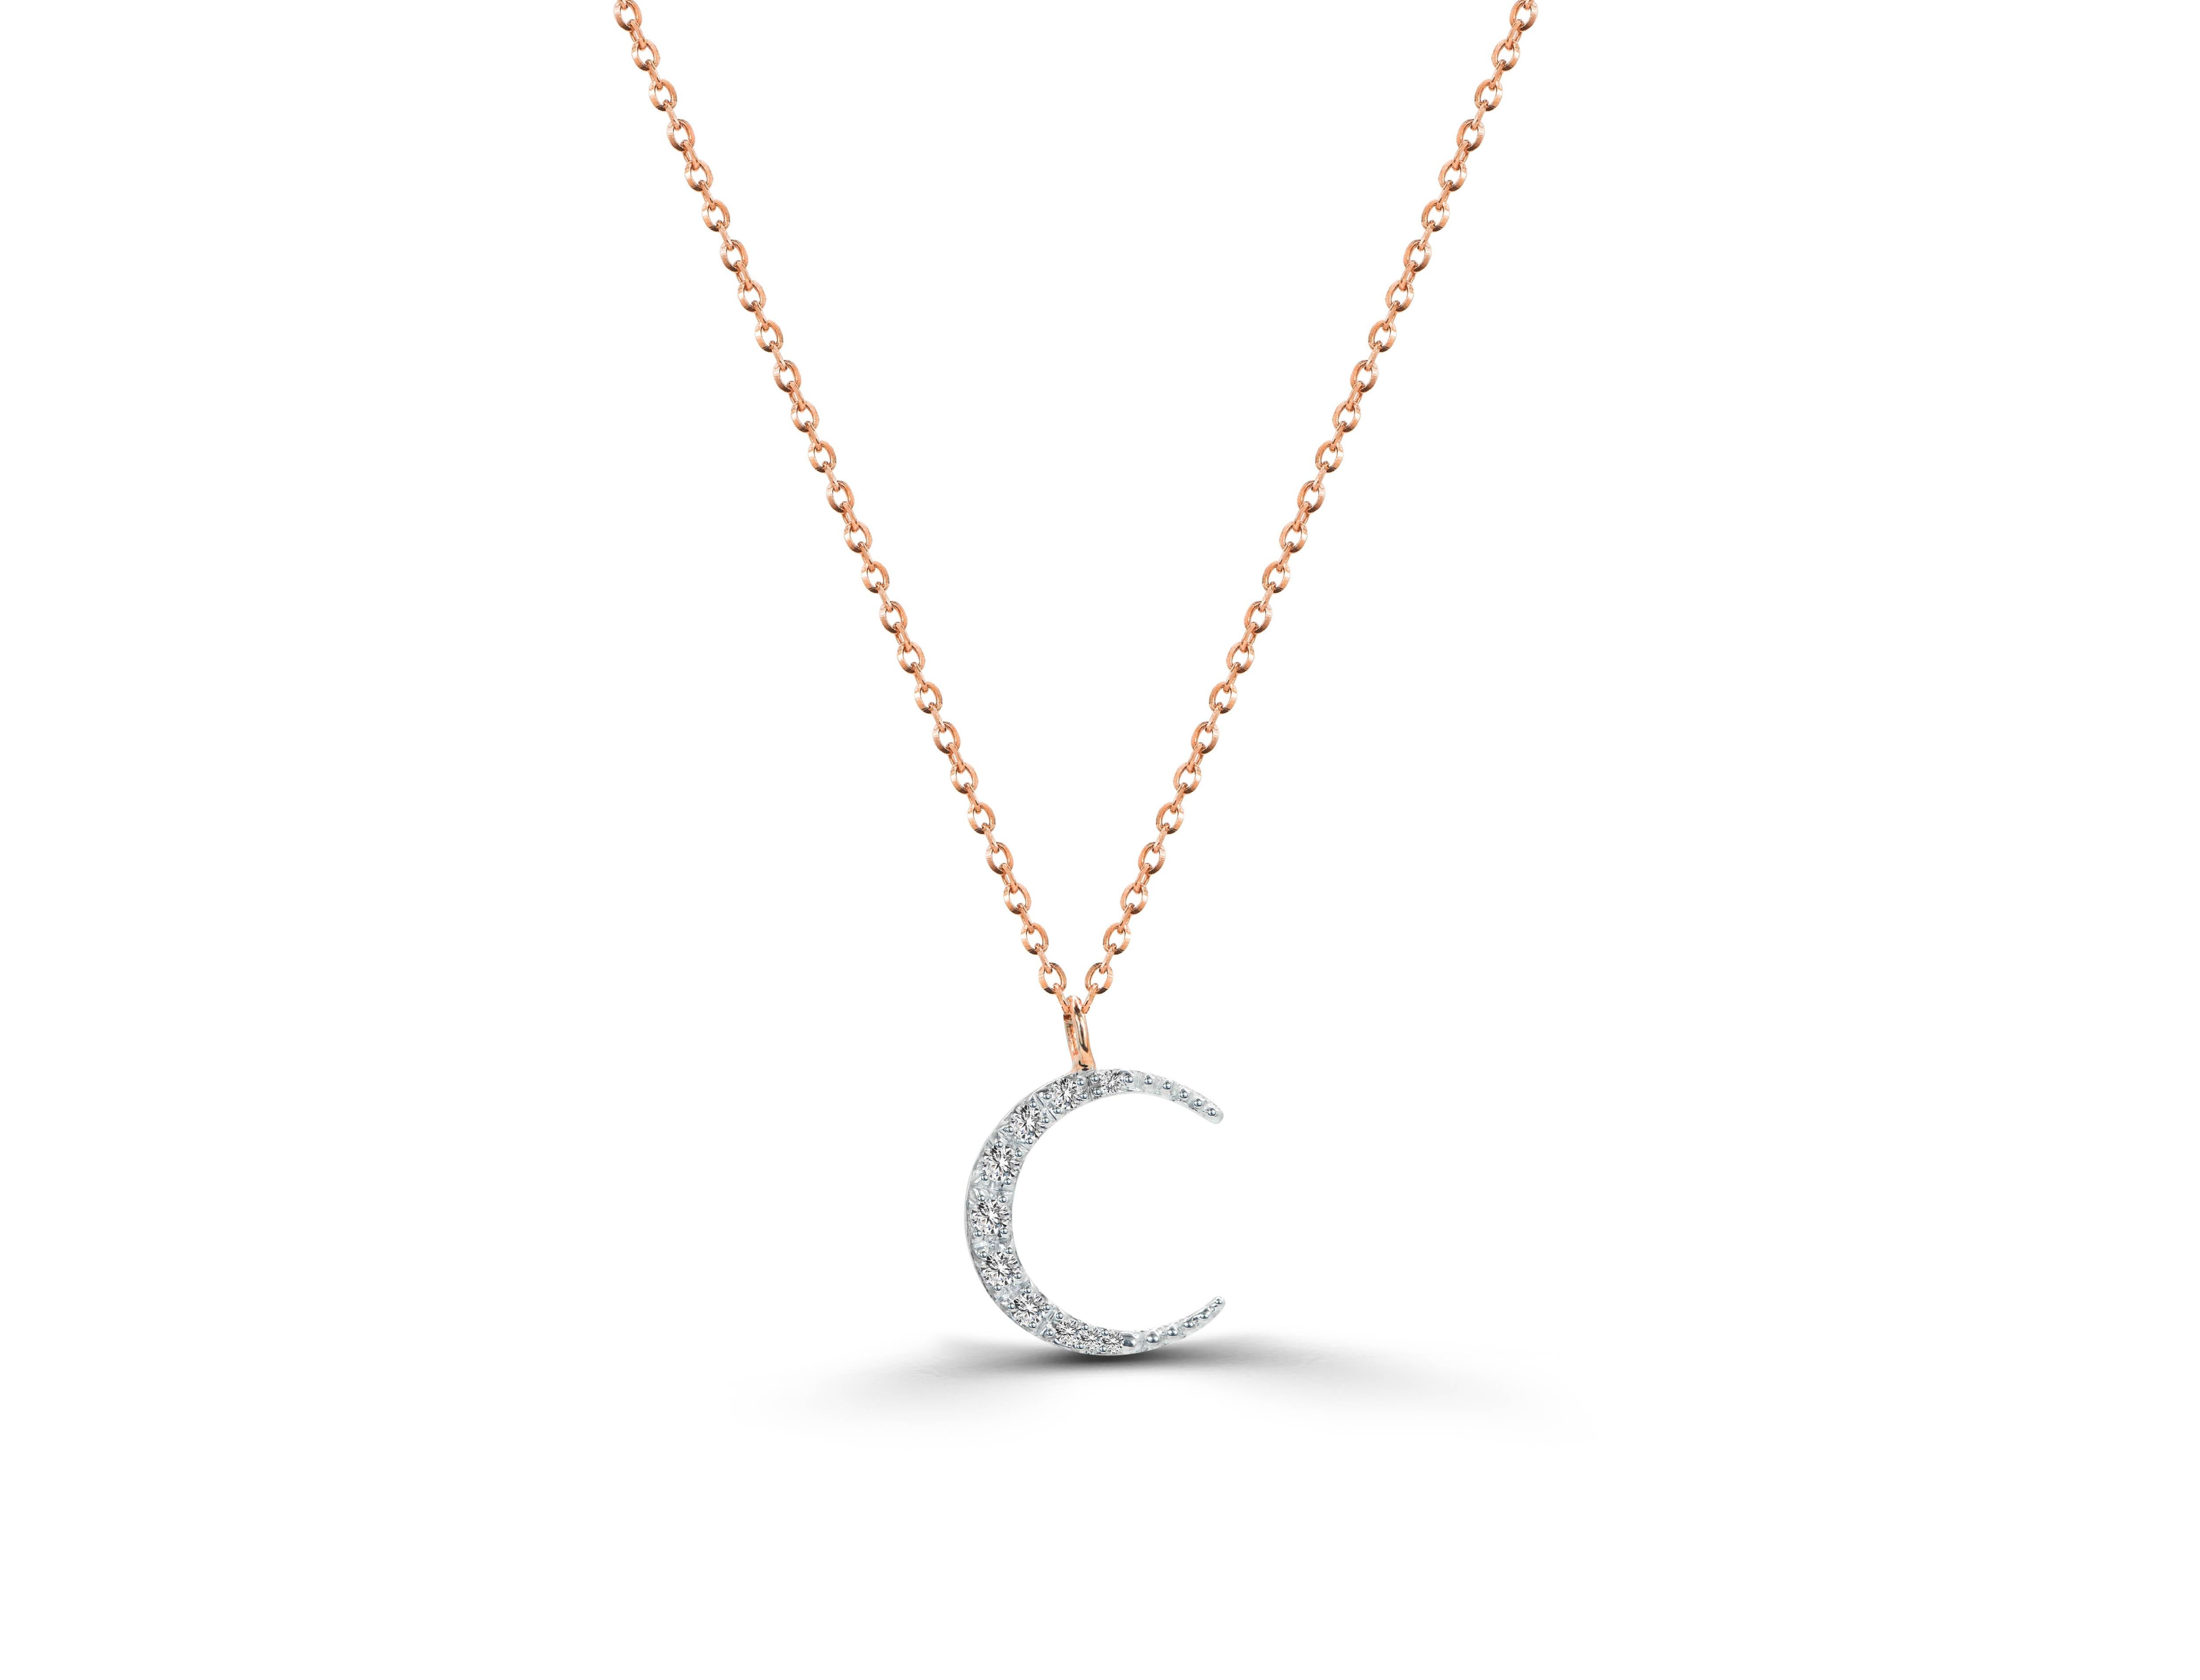 Crescent moon diamond necklace, Half moon necklace, Dainty diamond necklace, minimalist necklace, Gift for her, 18k gold, everyday necklace

Moon necklace, diamond Moon, Astronomy necklace, wedding necklace, Diamond pendant, bridesmaid necklace,